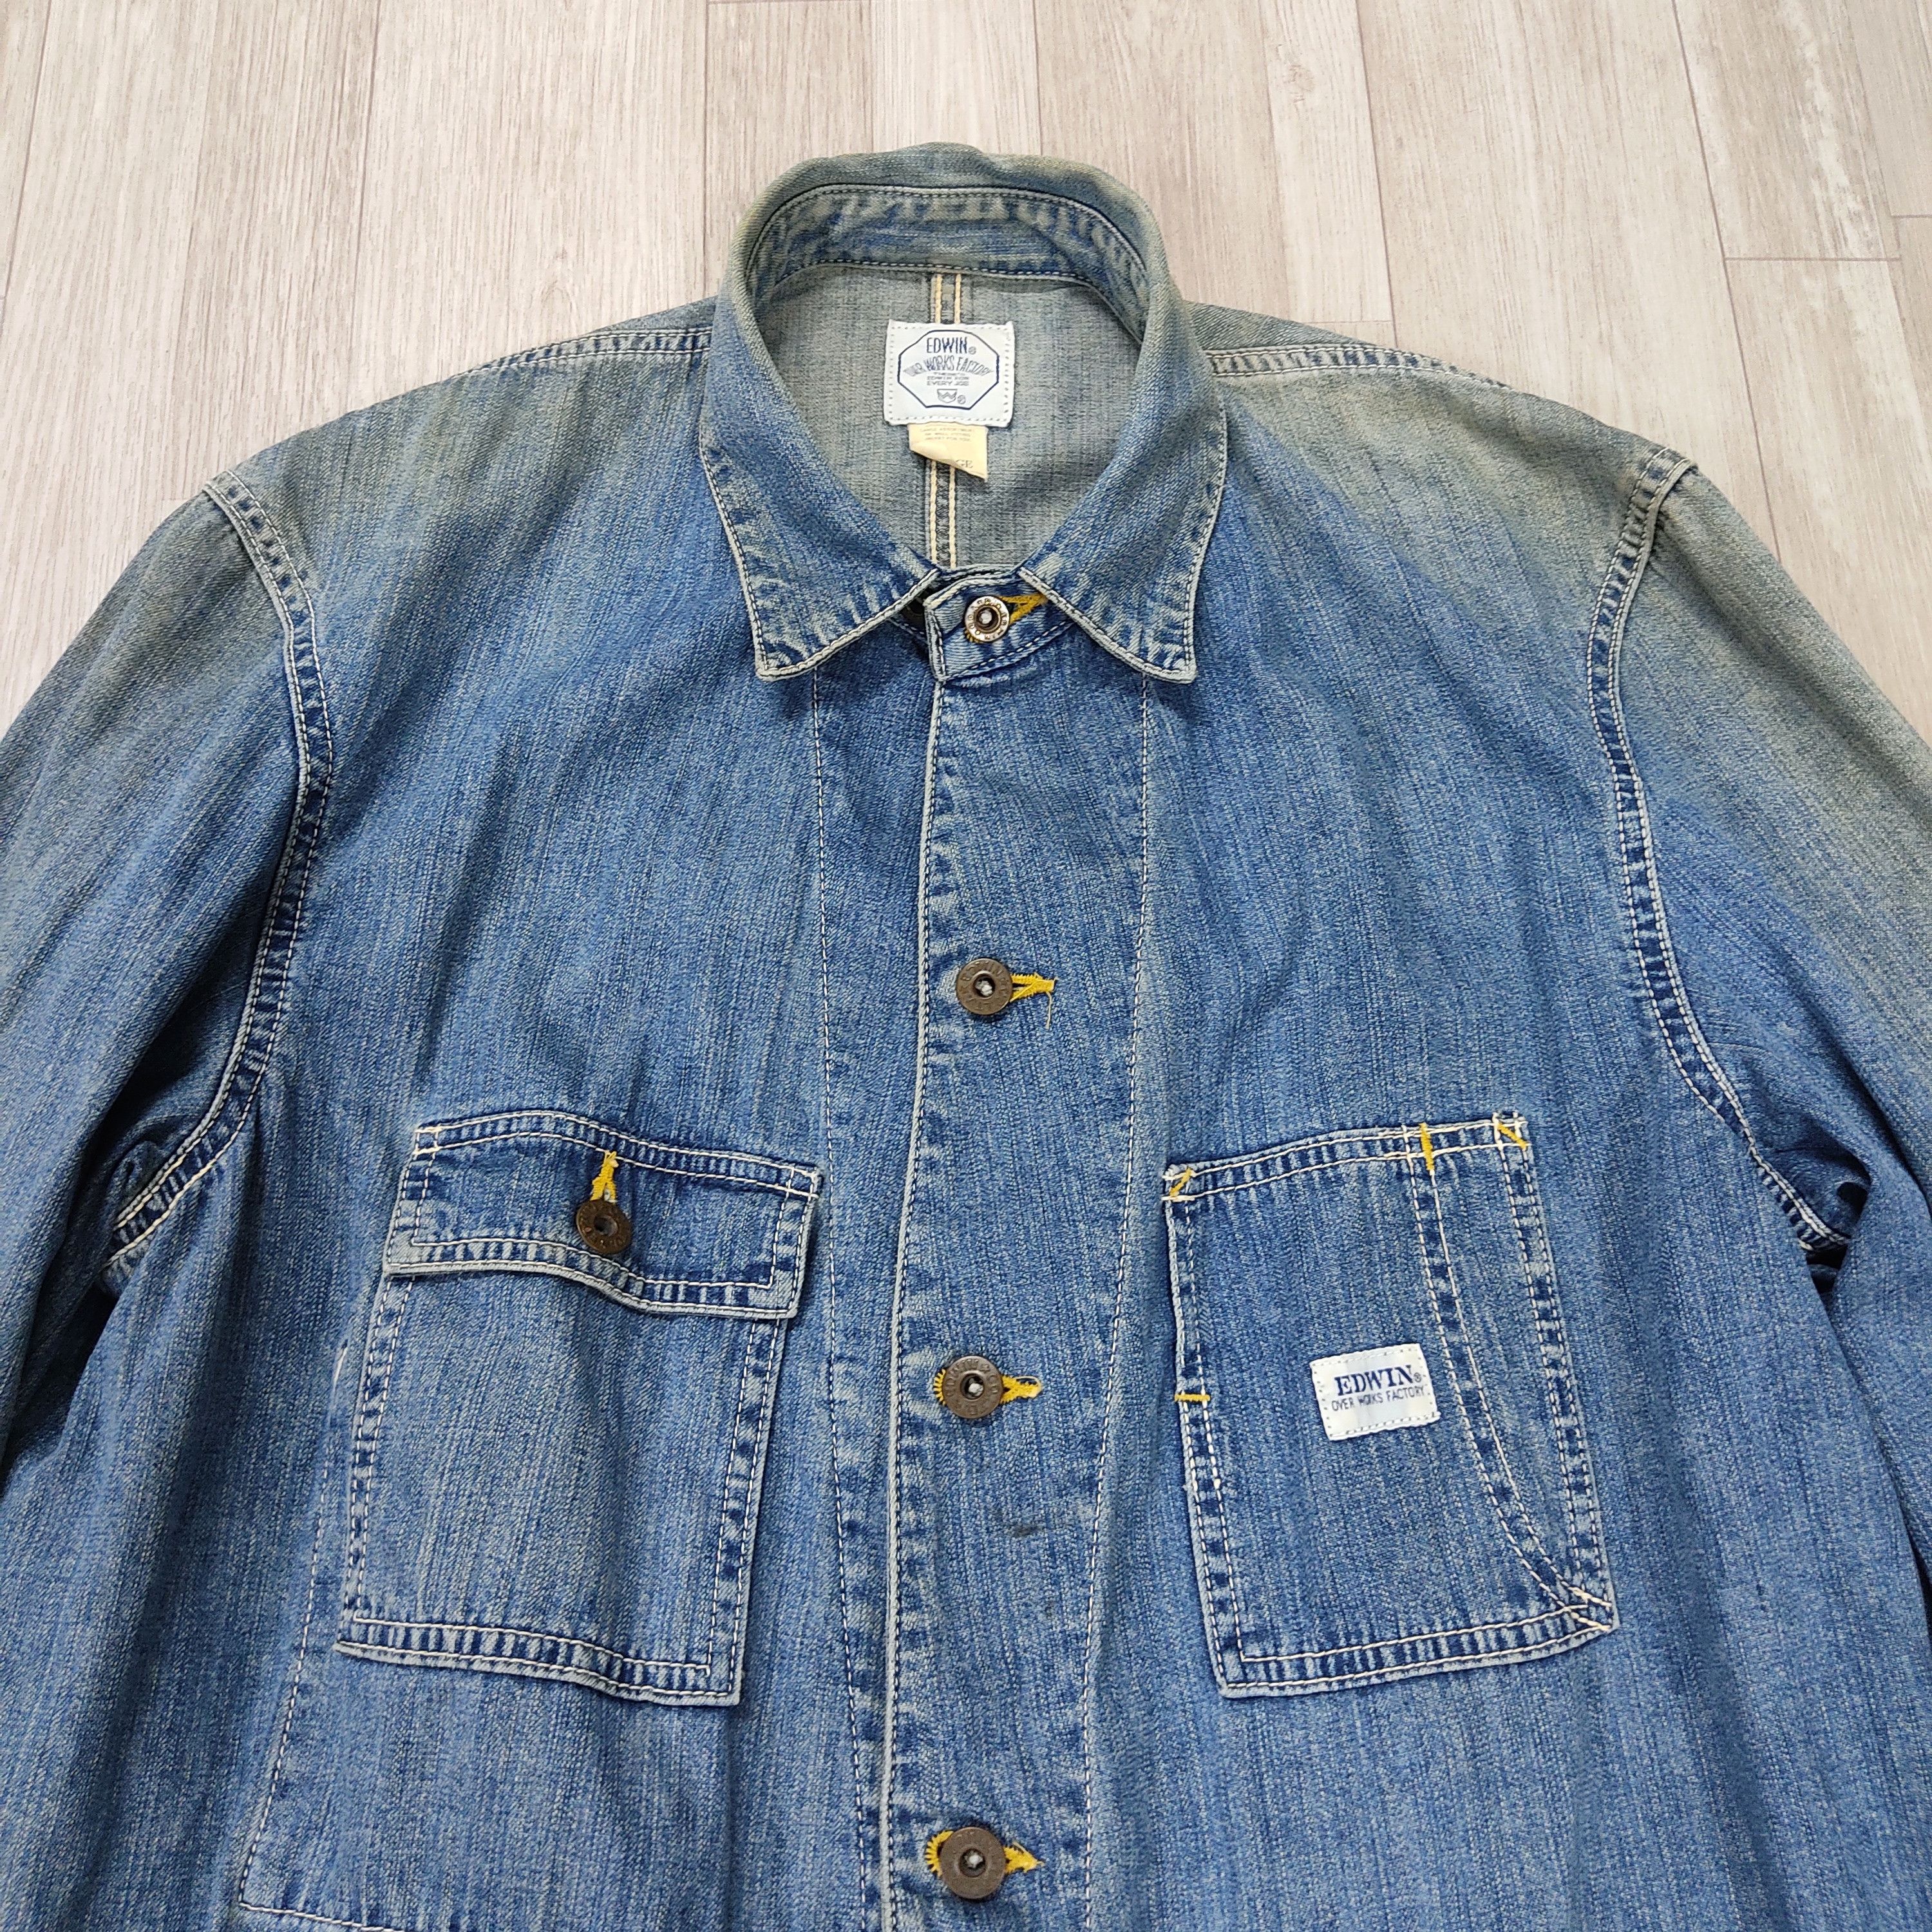 Vintage EDWIN Over Works Factory Chore Jacket - 7